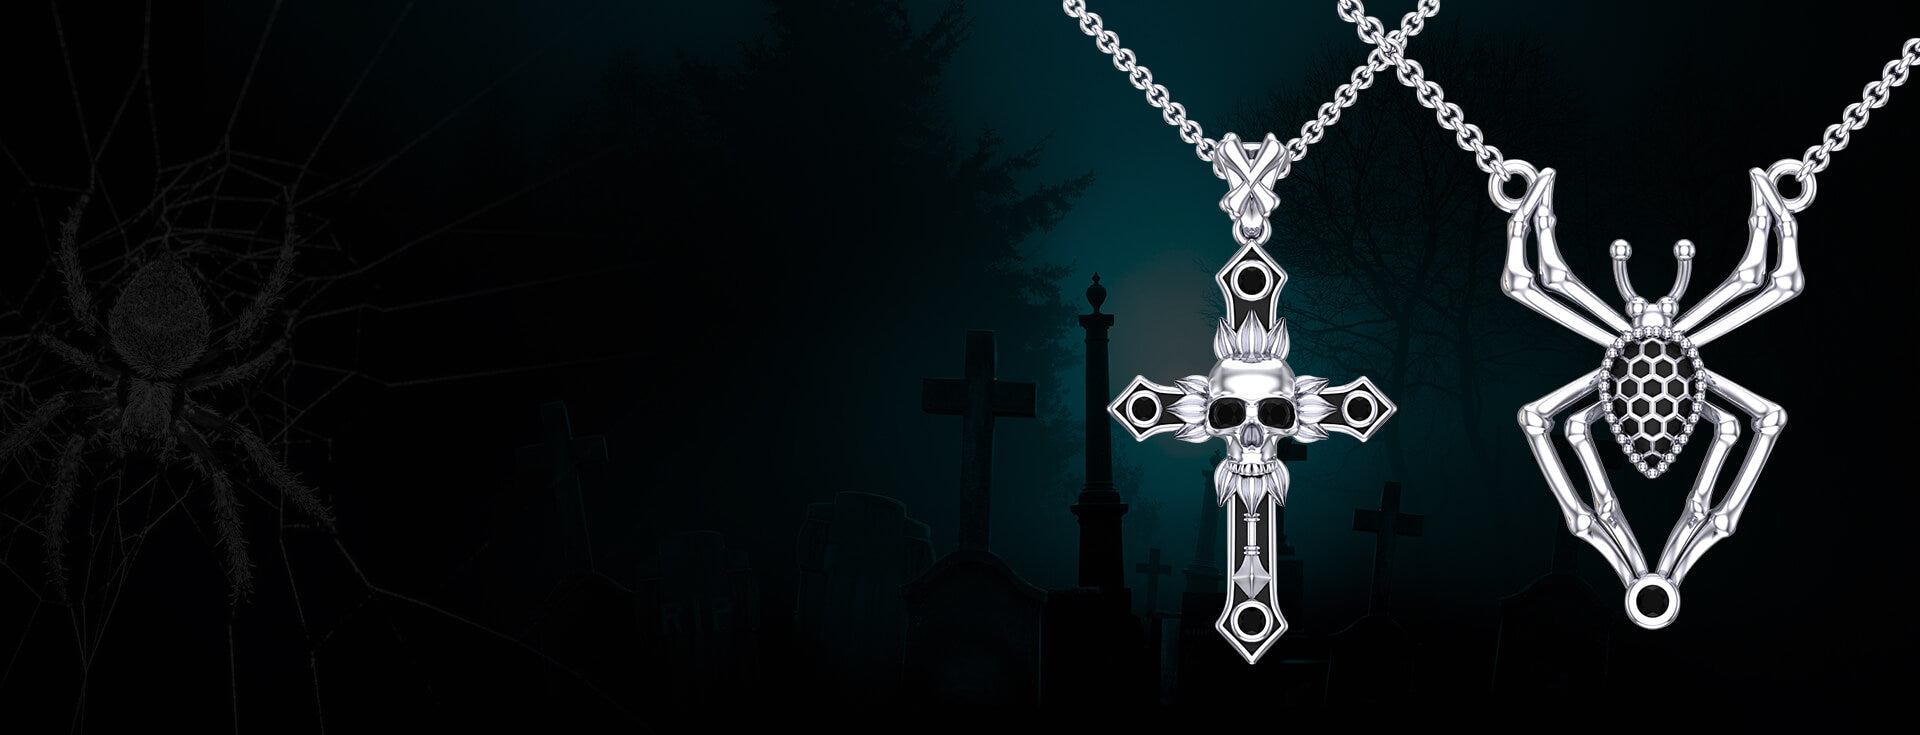 A dark and mysterious banner showcasing gothic skull and spider pendant jewelry, evoking a sense of intrigue and gothic elegance